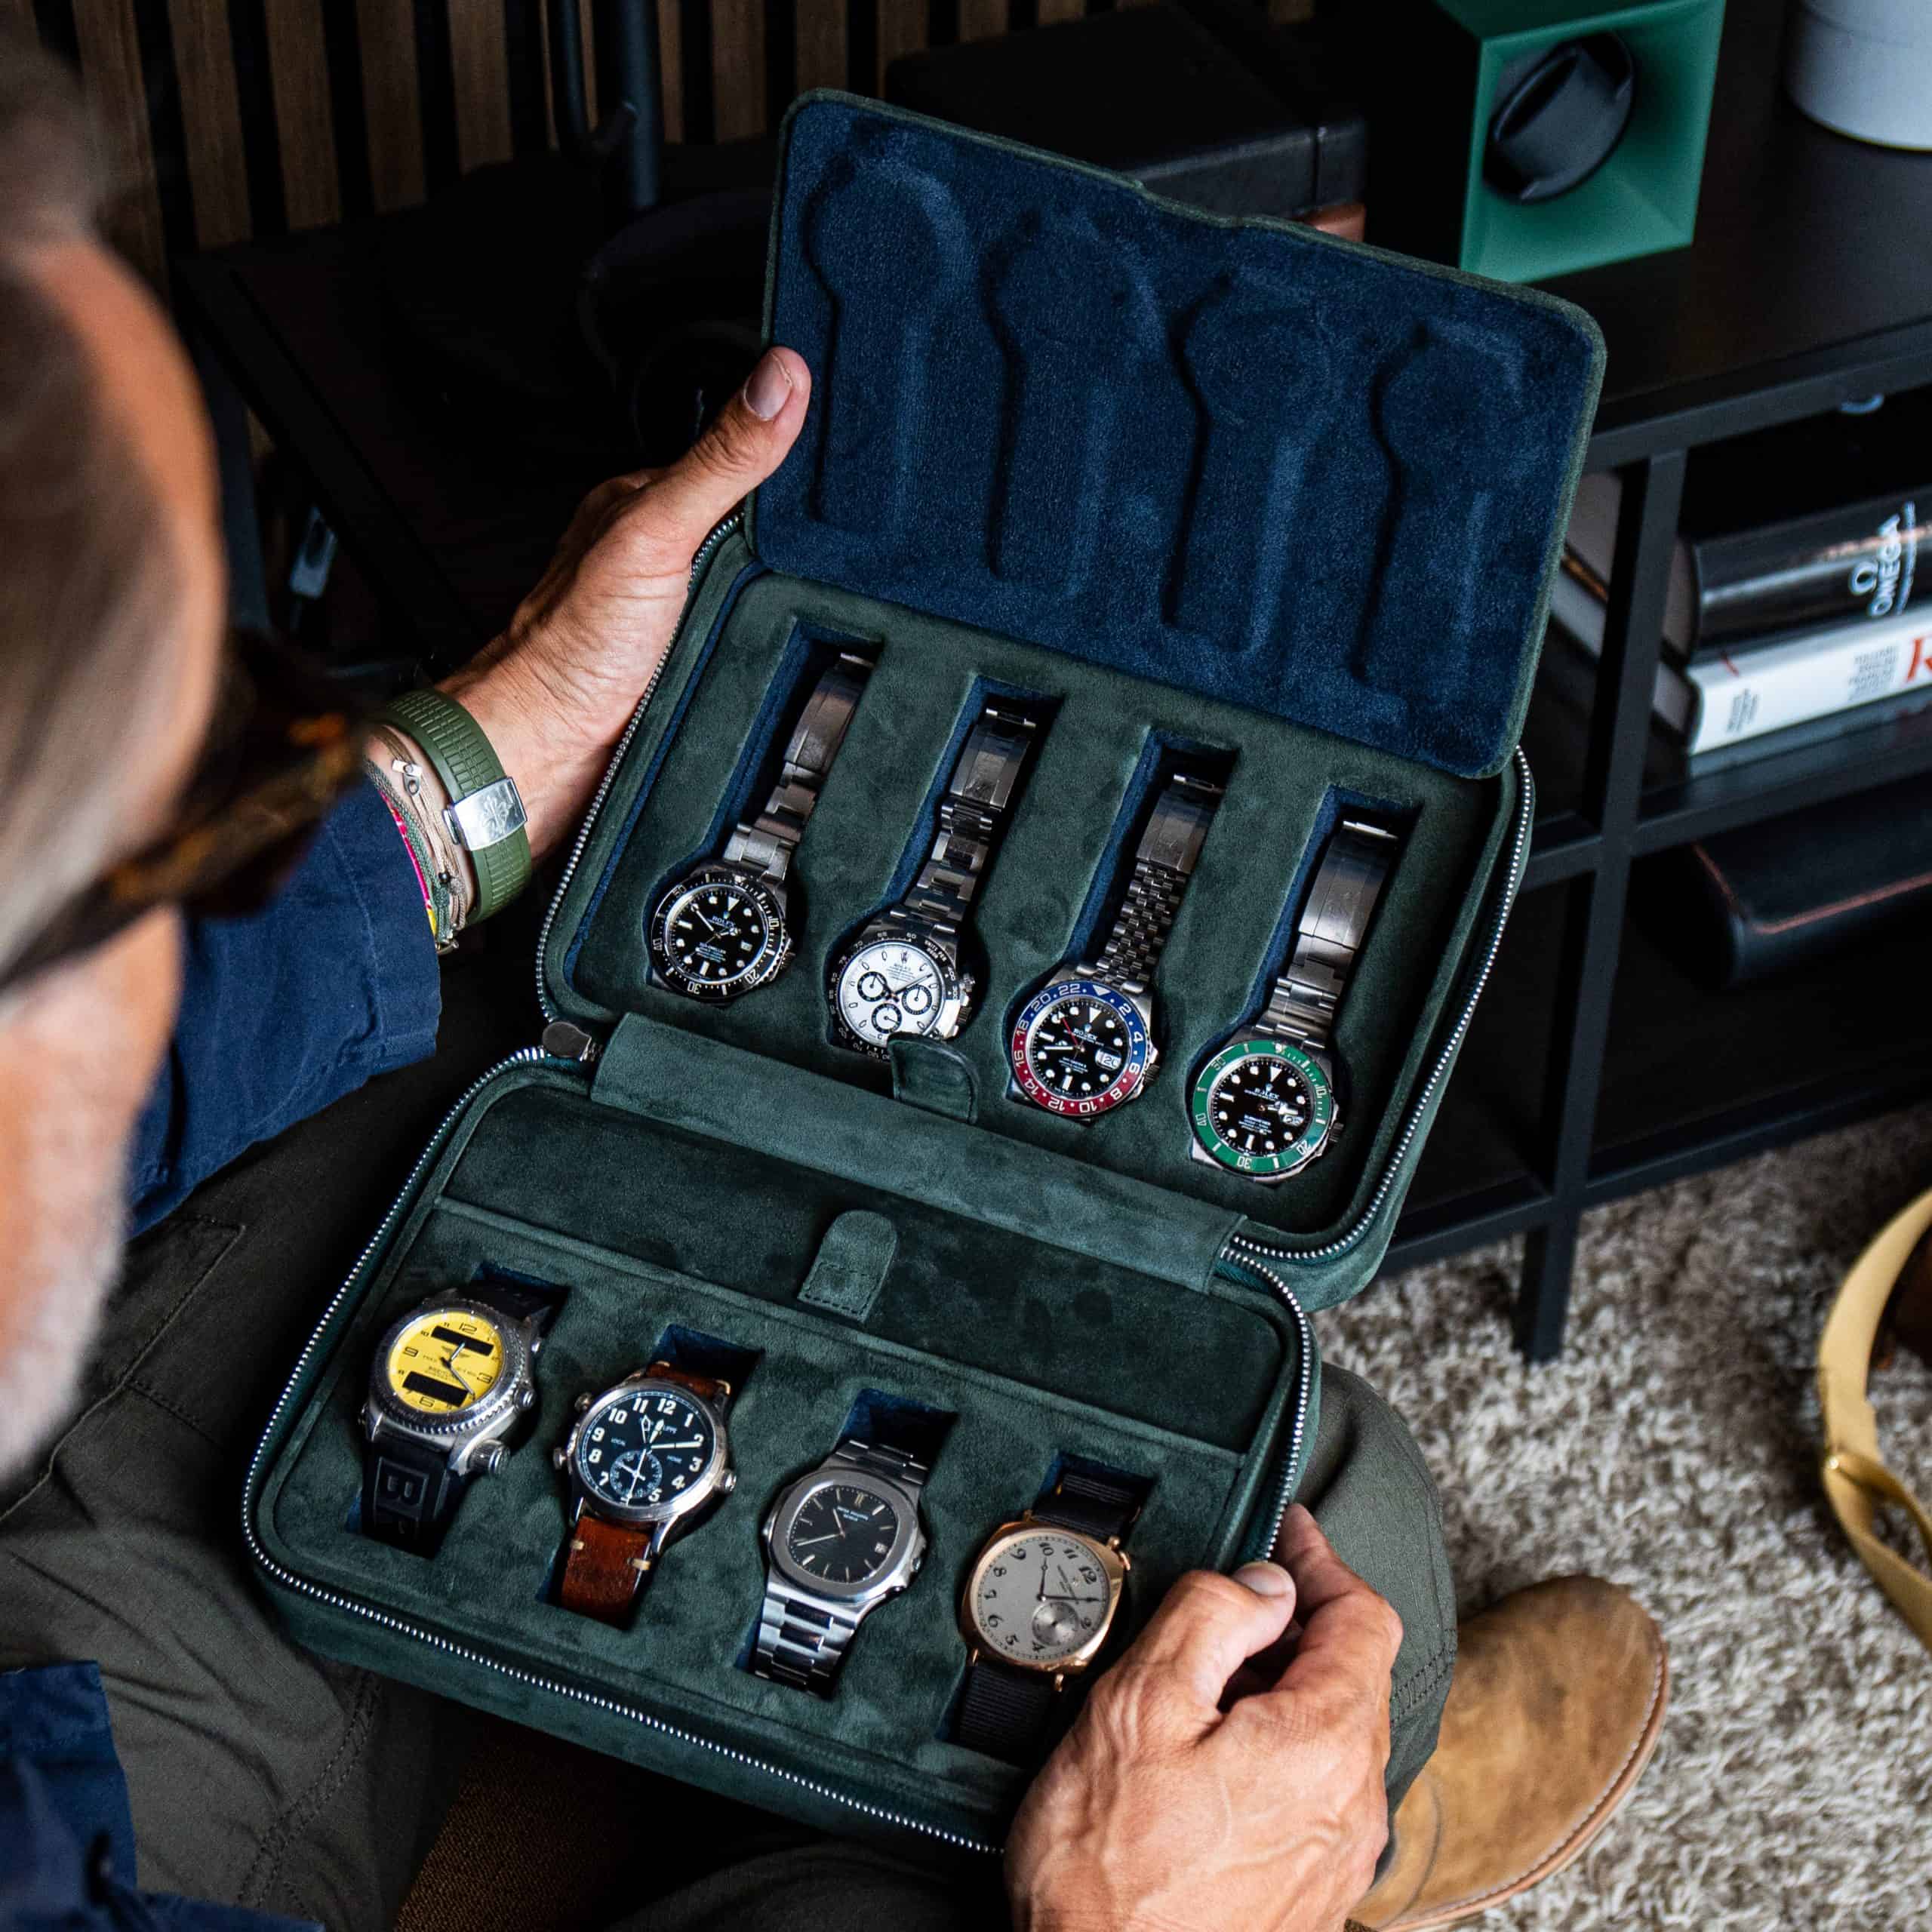 Forest Green 8 Slot Watch Box - $1,337 - Free shipping